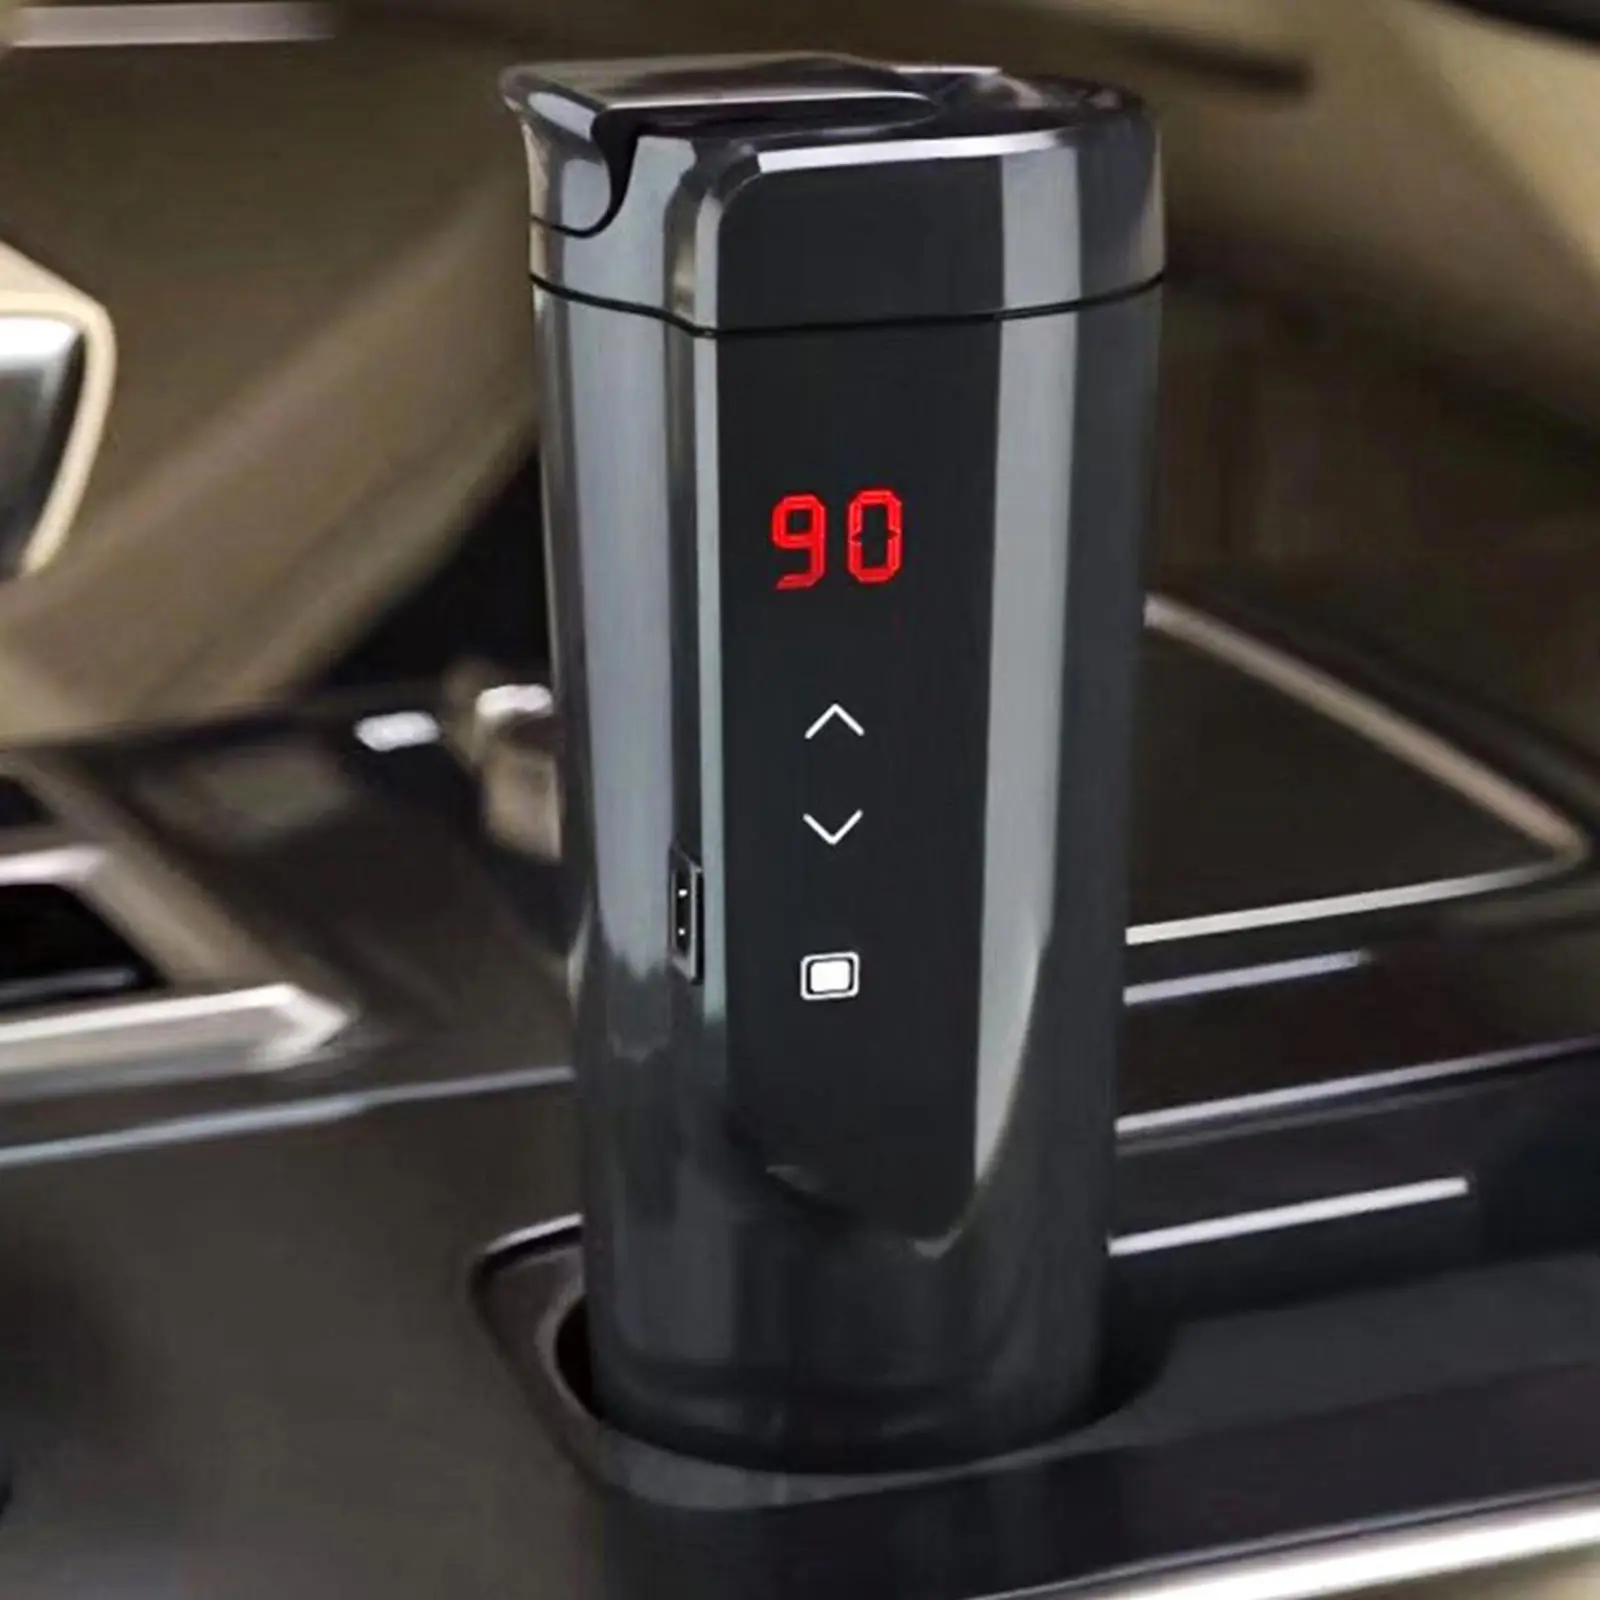 Intelligent Heated Travel Tea Mug 12V Electric Car Coffee Cup with Temperature Control, Real Time Display